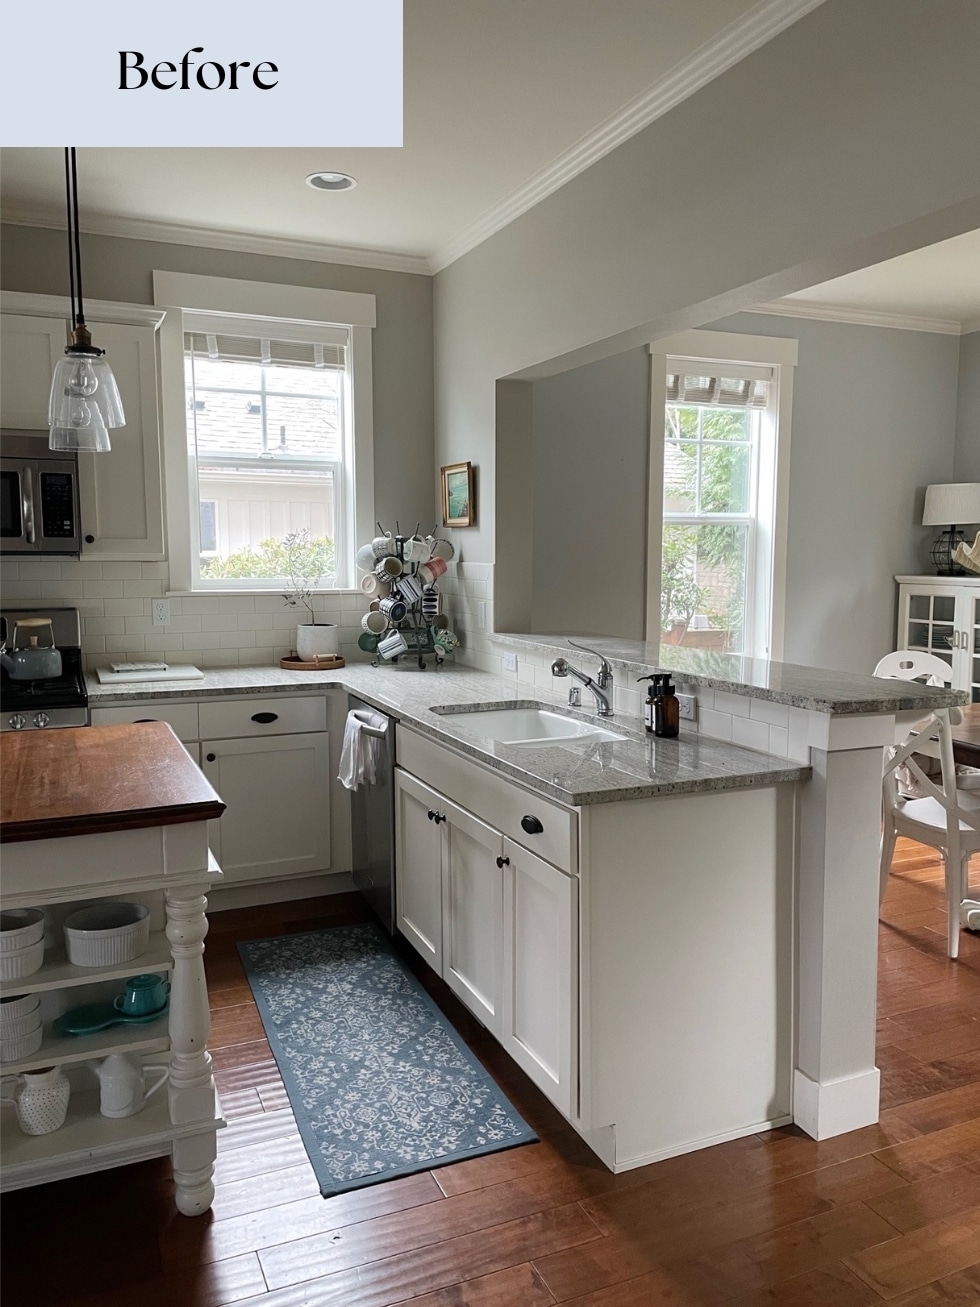 Our Kitchen Before and After (with photos of the kitchen and dining room swap!)